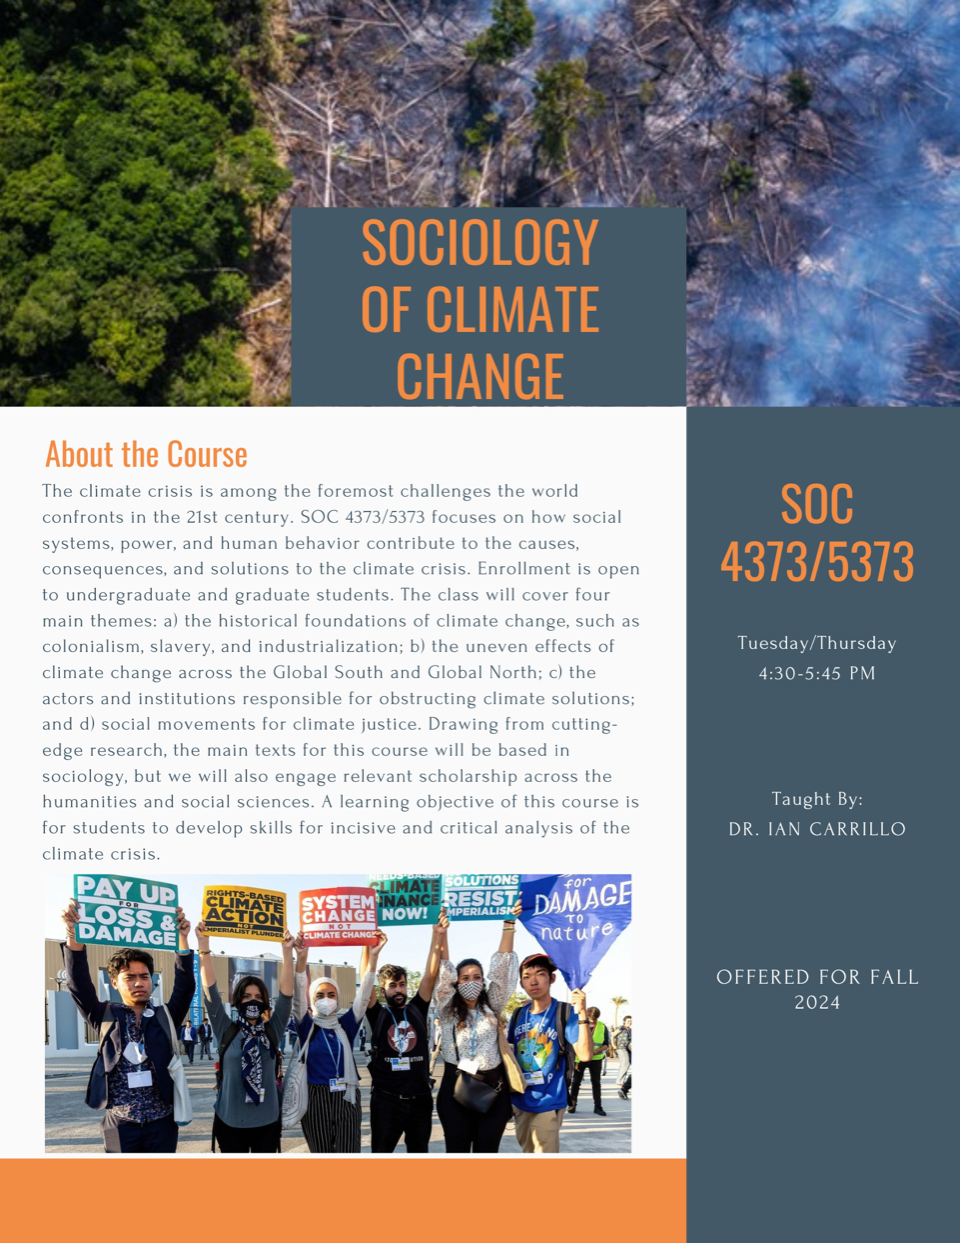 Sociology of Climate Change. SOC 4373/5373, Tuesday/Thursday 4:30-5:45 PM; Taught by: Dr. Ian Carrillo; Offered for Fall 2024. About the Course - The climate crisis is among the foremost challenges the world confronts in the 21st century. SOC 4373/5373 focuses on how social systems, power, and human behavior contribute to the causes, consequences, and solutions to the climate crisis. Enrollment is open to undergraduate and graduate students. The class will cover four main themes: a) the historical foundations of climate change, such as colonialism, slavery, and industrialization; b) the uneven effects of climate change across the Global South and Global North; c) the actors and institutions responsible for obstructing climate solutions; and d) social movements for climate justice. Drawing from cutting-edge research, the main texts for this course will be based in sociology, but we will also engage relevant scholarship across the humanities and social sciences. A learning objective of this course is for students to develop skills for incisive and critical analysis of the climate crisis. 